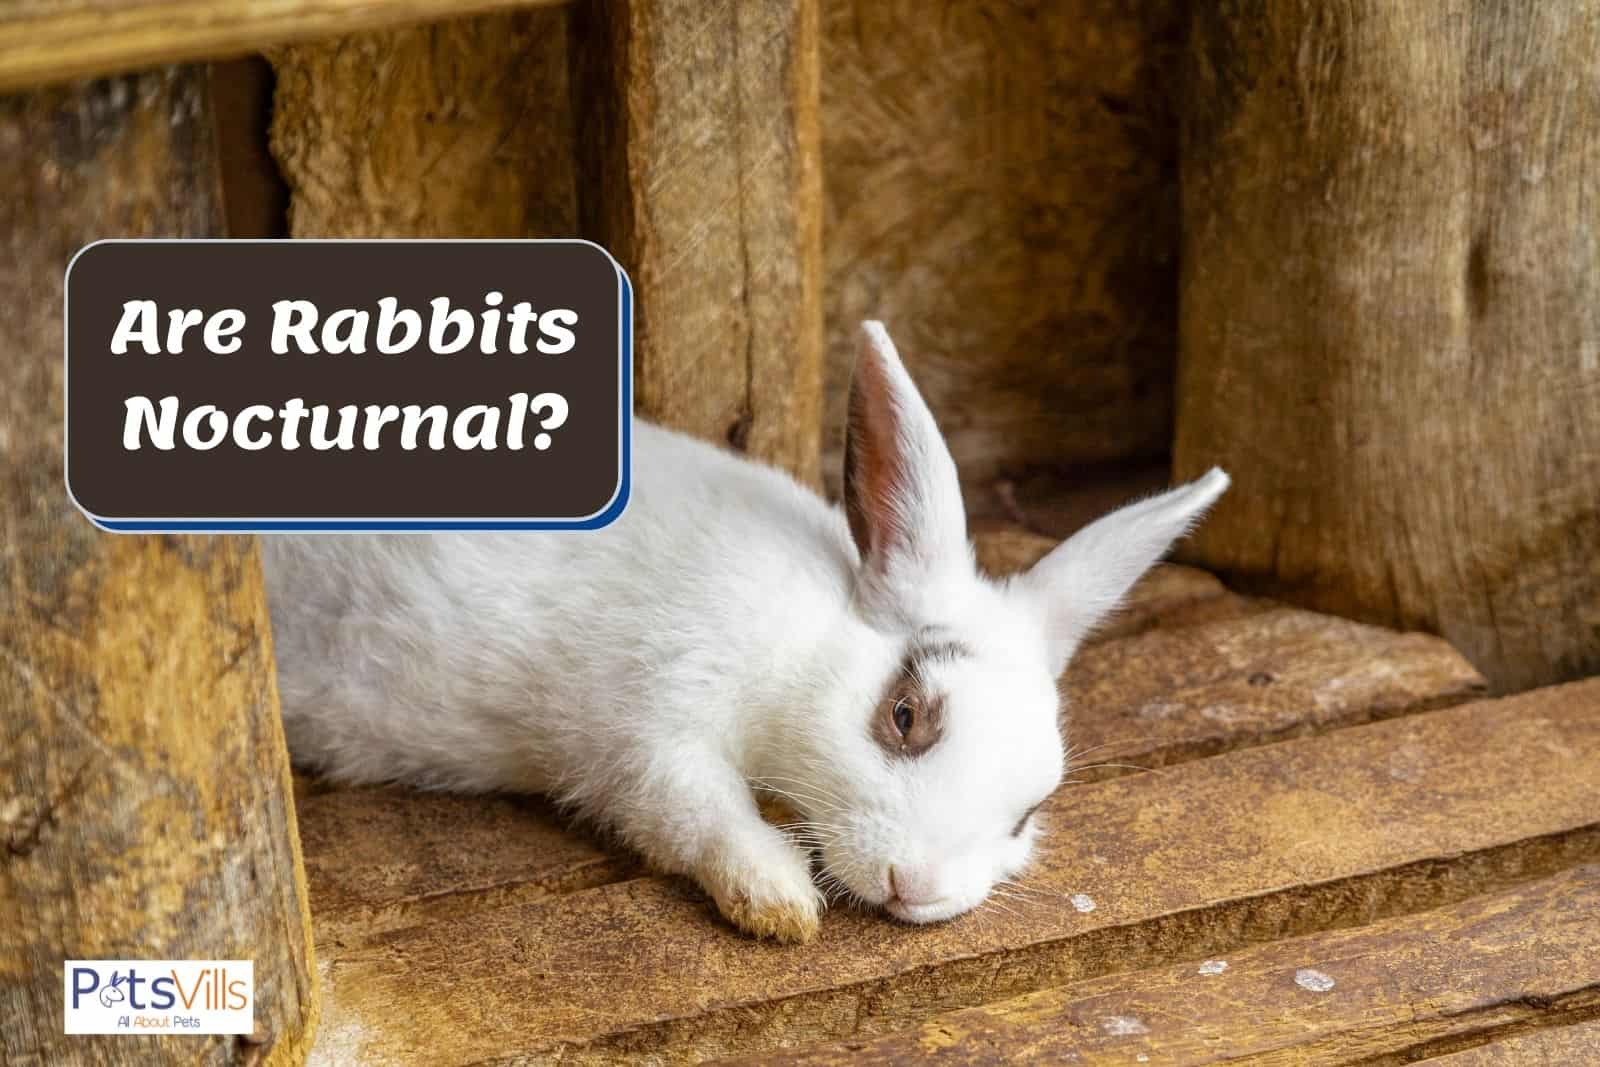 Is A Rabbit Nocturnal?